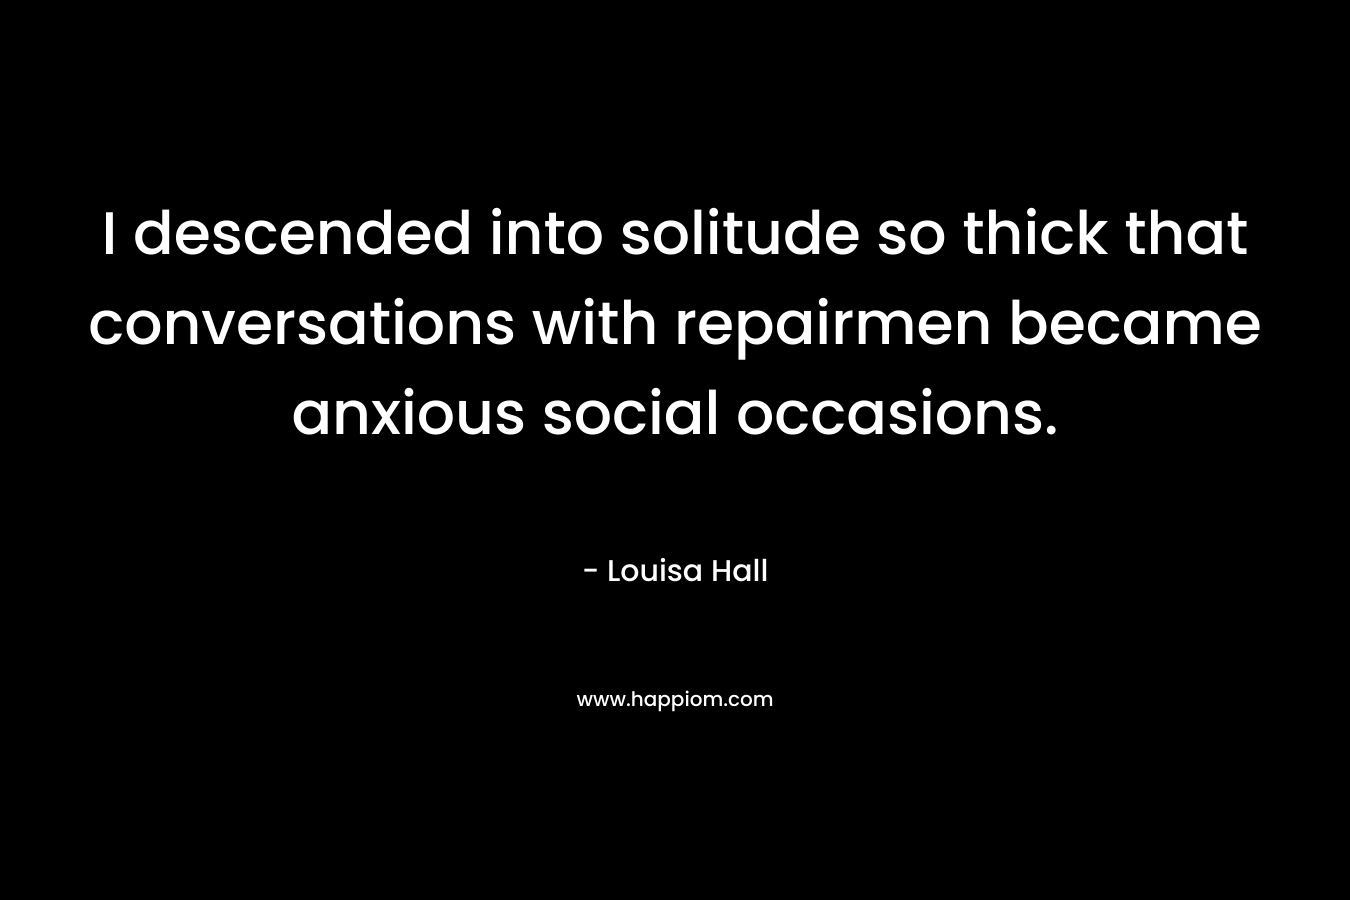 I descended into solitude so thick that conversations with repairmen became anxious social occasions. – Louisa Hall